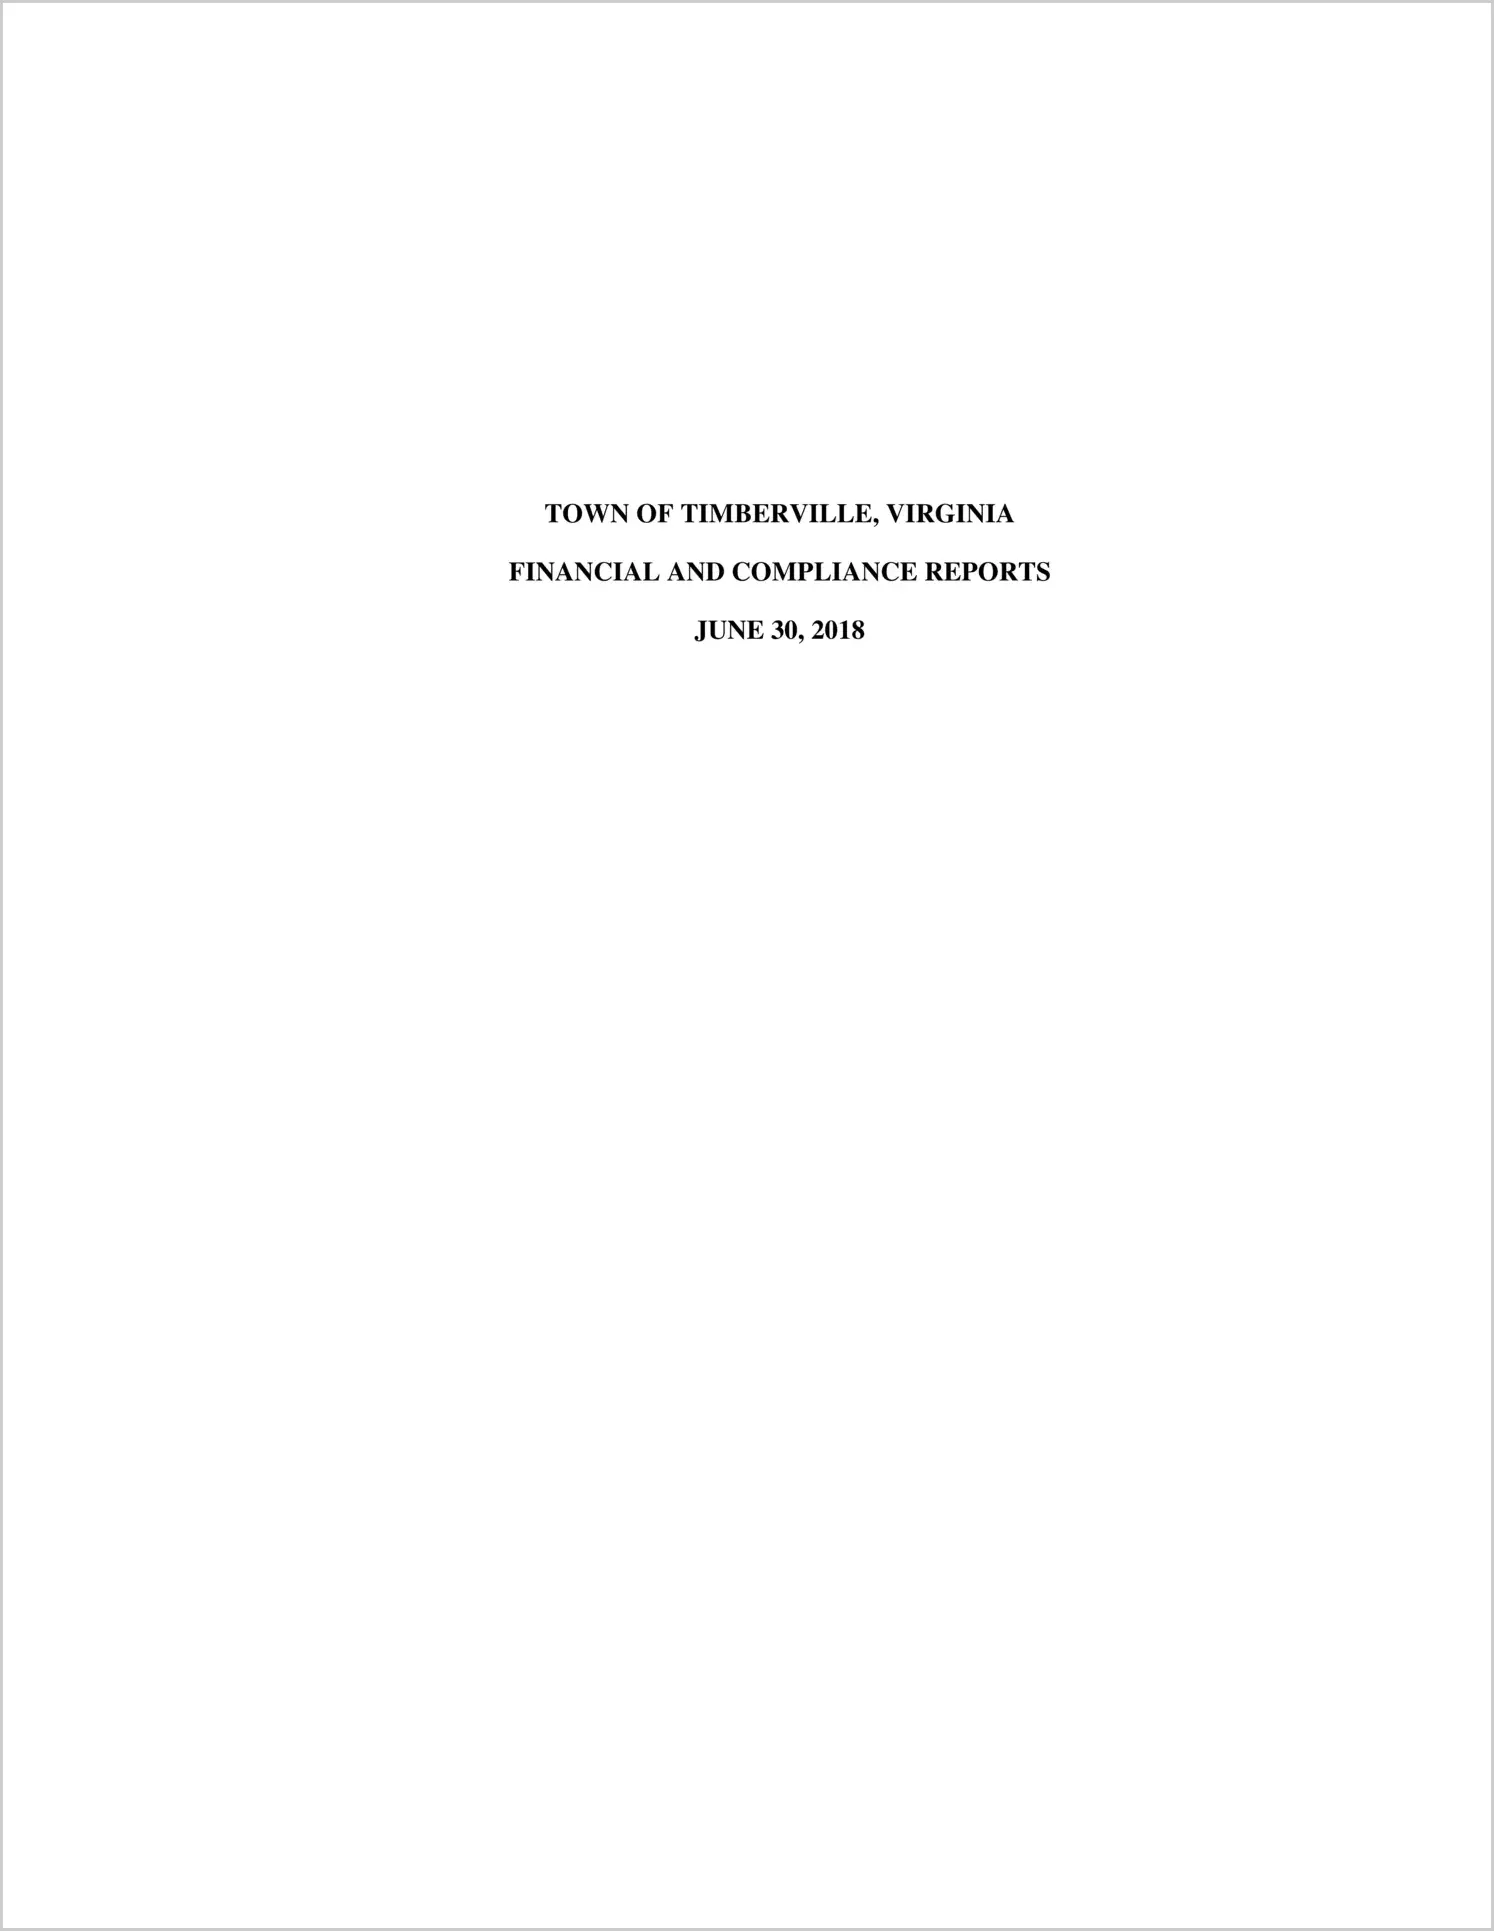 2018 Annual Financial Report for Town of Timberville